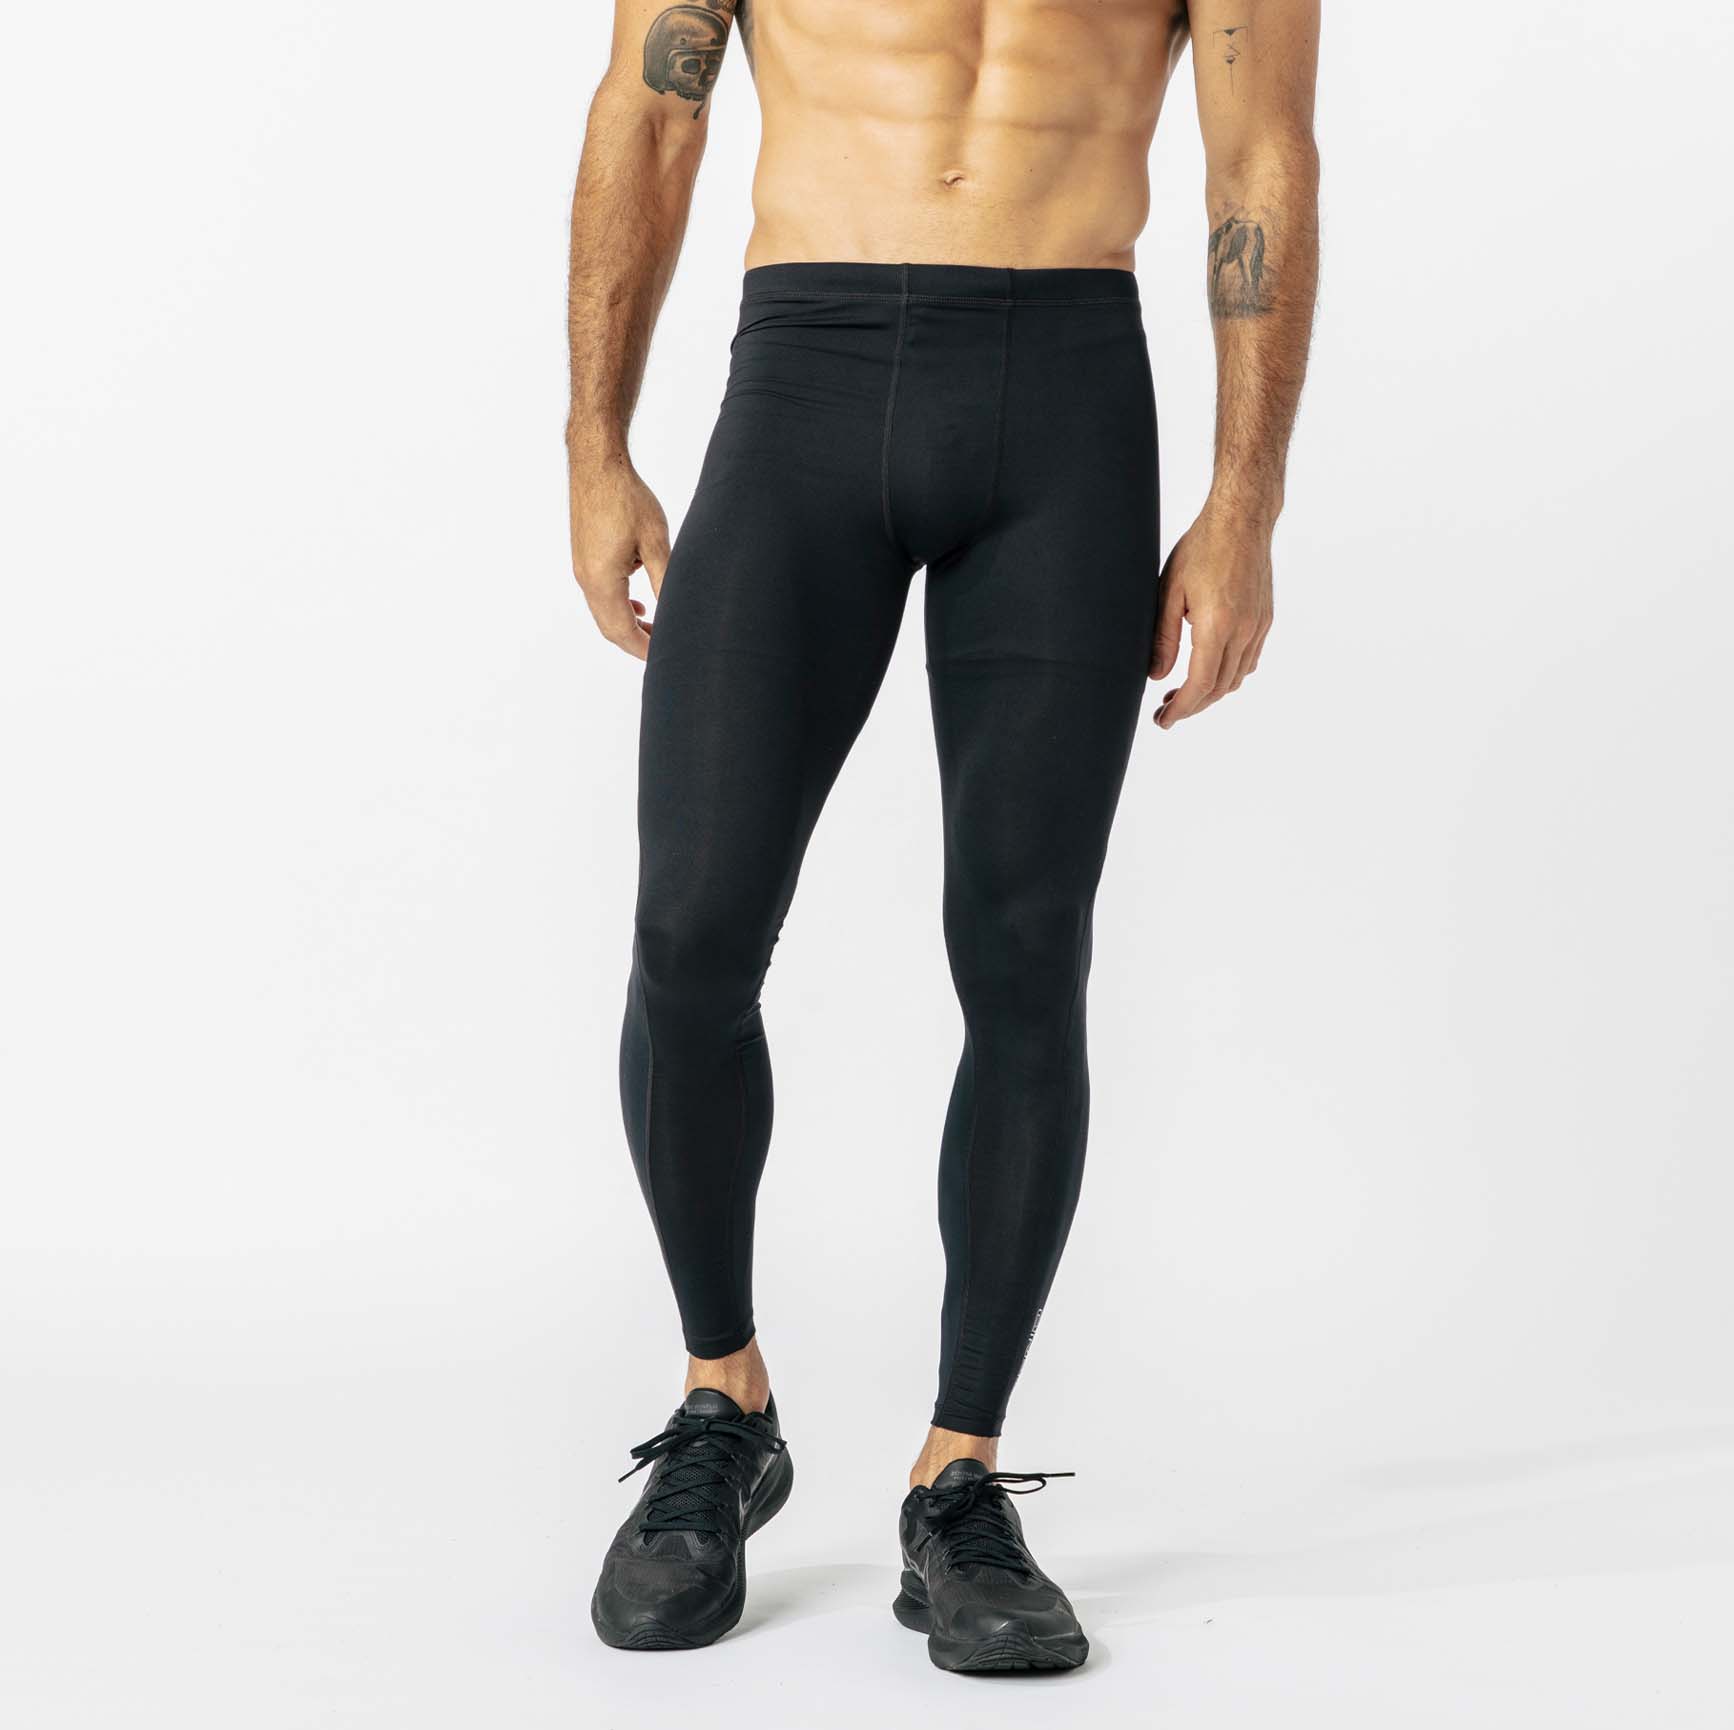 Thermal Compression Tights for Men | Active Gear – DFND